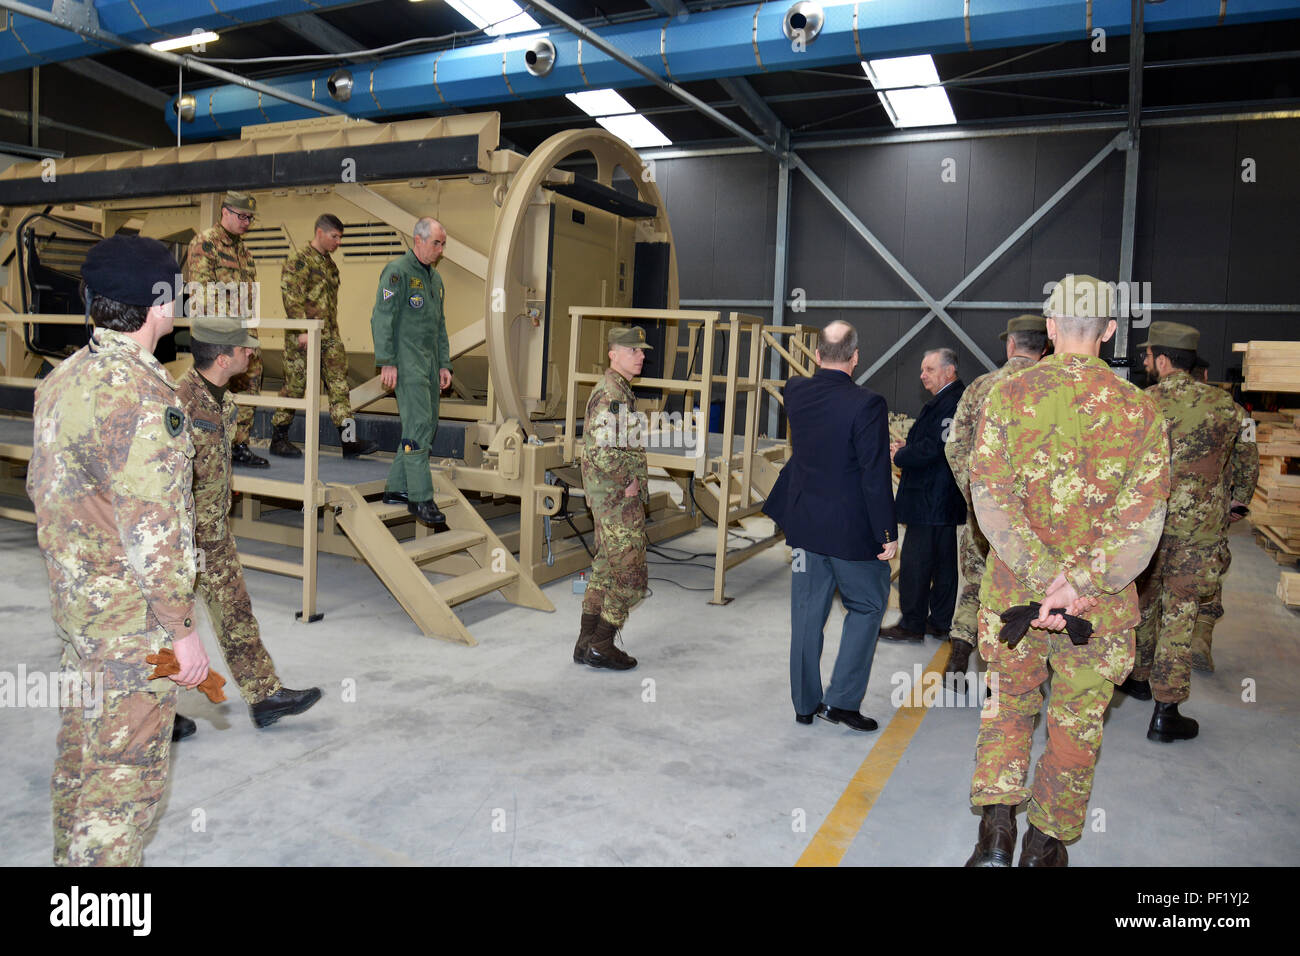 James V. Matheson, Chief, U.S. Army Regional Training Support Division, and Ivano Trevisanutto, Chief, U.S. Army Training Support Center Italy,  show  the Mine Resistant Ambush Protected (MRAP), to Italian Army Brig. Gen. Michele Risi, Multinational Land Force “Julia” Alpine Brigade Commander and his brigade staff, during the tour at RTSD South in Caserma Ederle, Vicenza, Italy, Feb. 24, 2016. Italian Army visit U.S. Army RTSD South, in order to enhance to bilateral relations and to expand levels of cooperation and the capacity of the personnel involved in joint operations. (Photo by Visual In Stock Photo